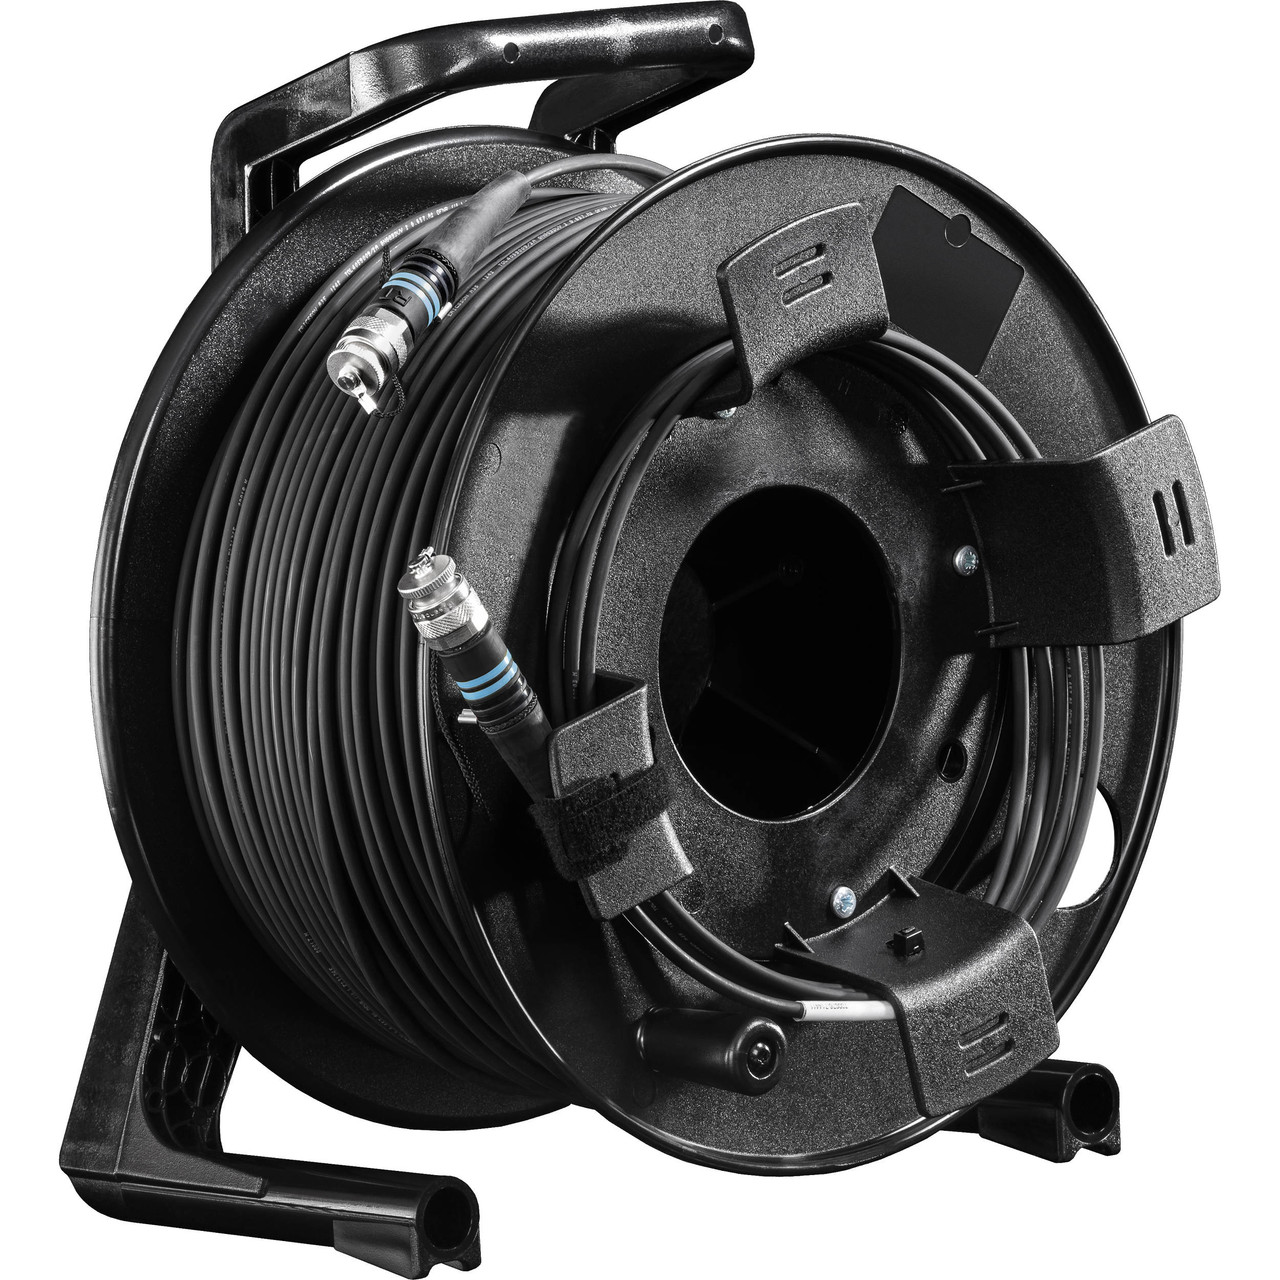 SDI Cable reel for TVs and projector 